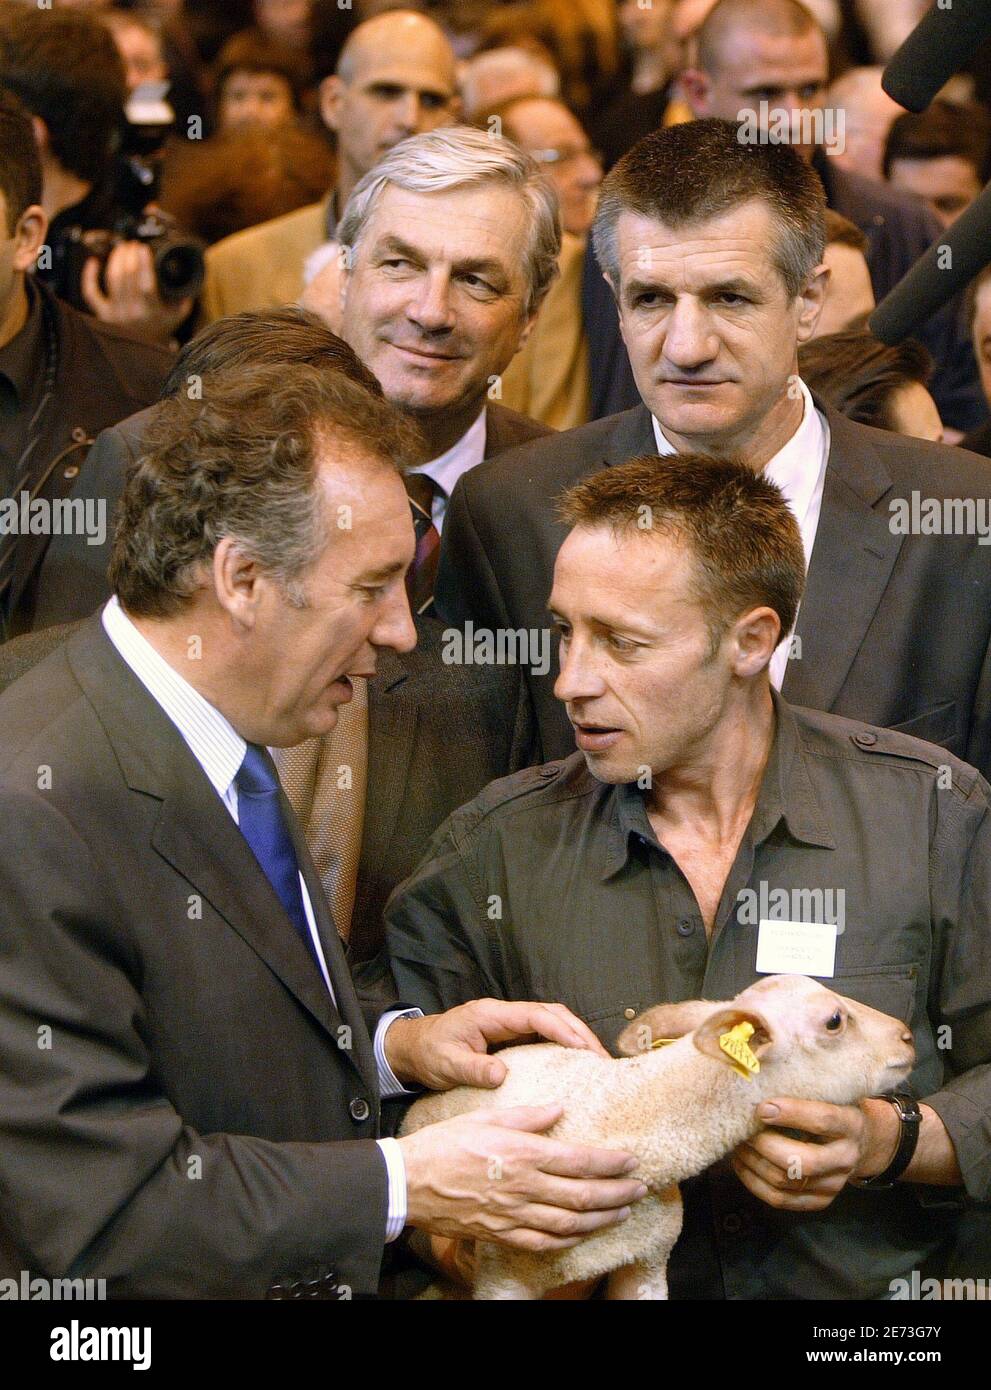 France's UDF political party presidential candidate Francois Bayrou and Jean  Lassalle visit the Agriculture Fair in Paris, France on March 6, 2007.  French farmers will present livestock and agricultural products at the